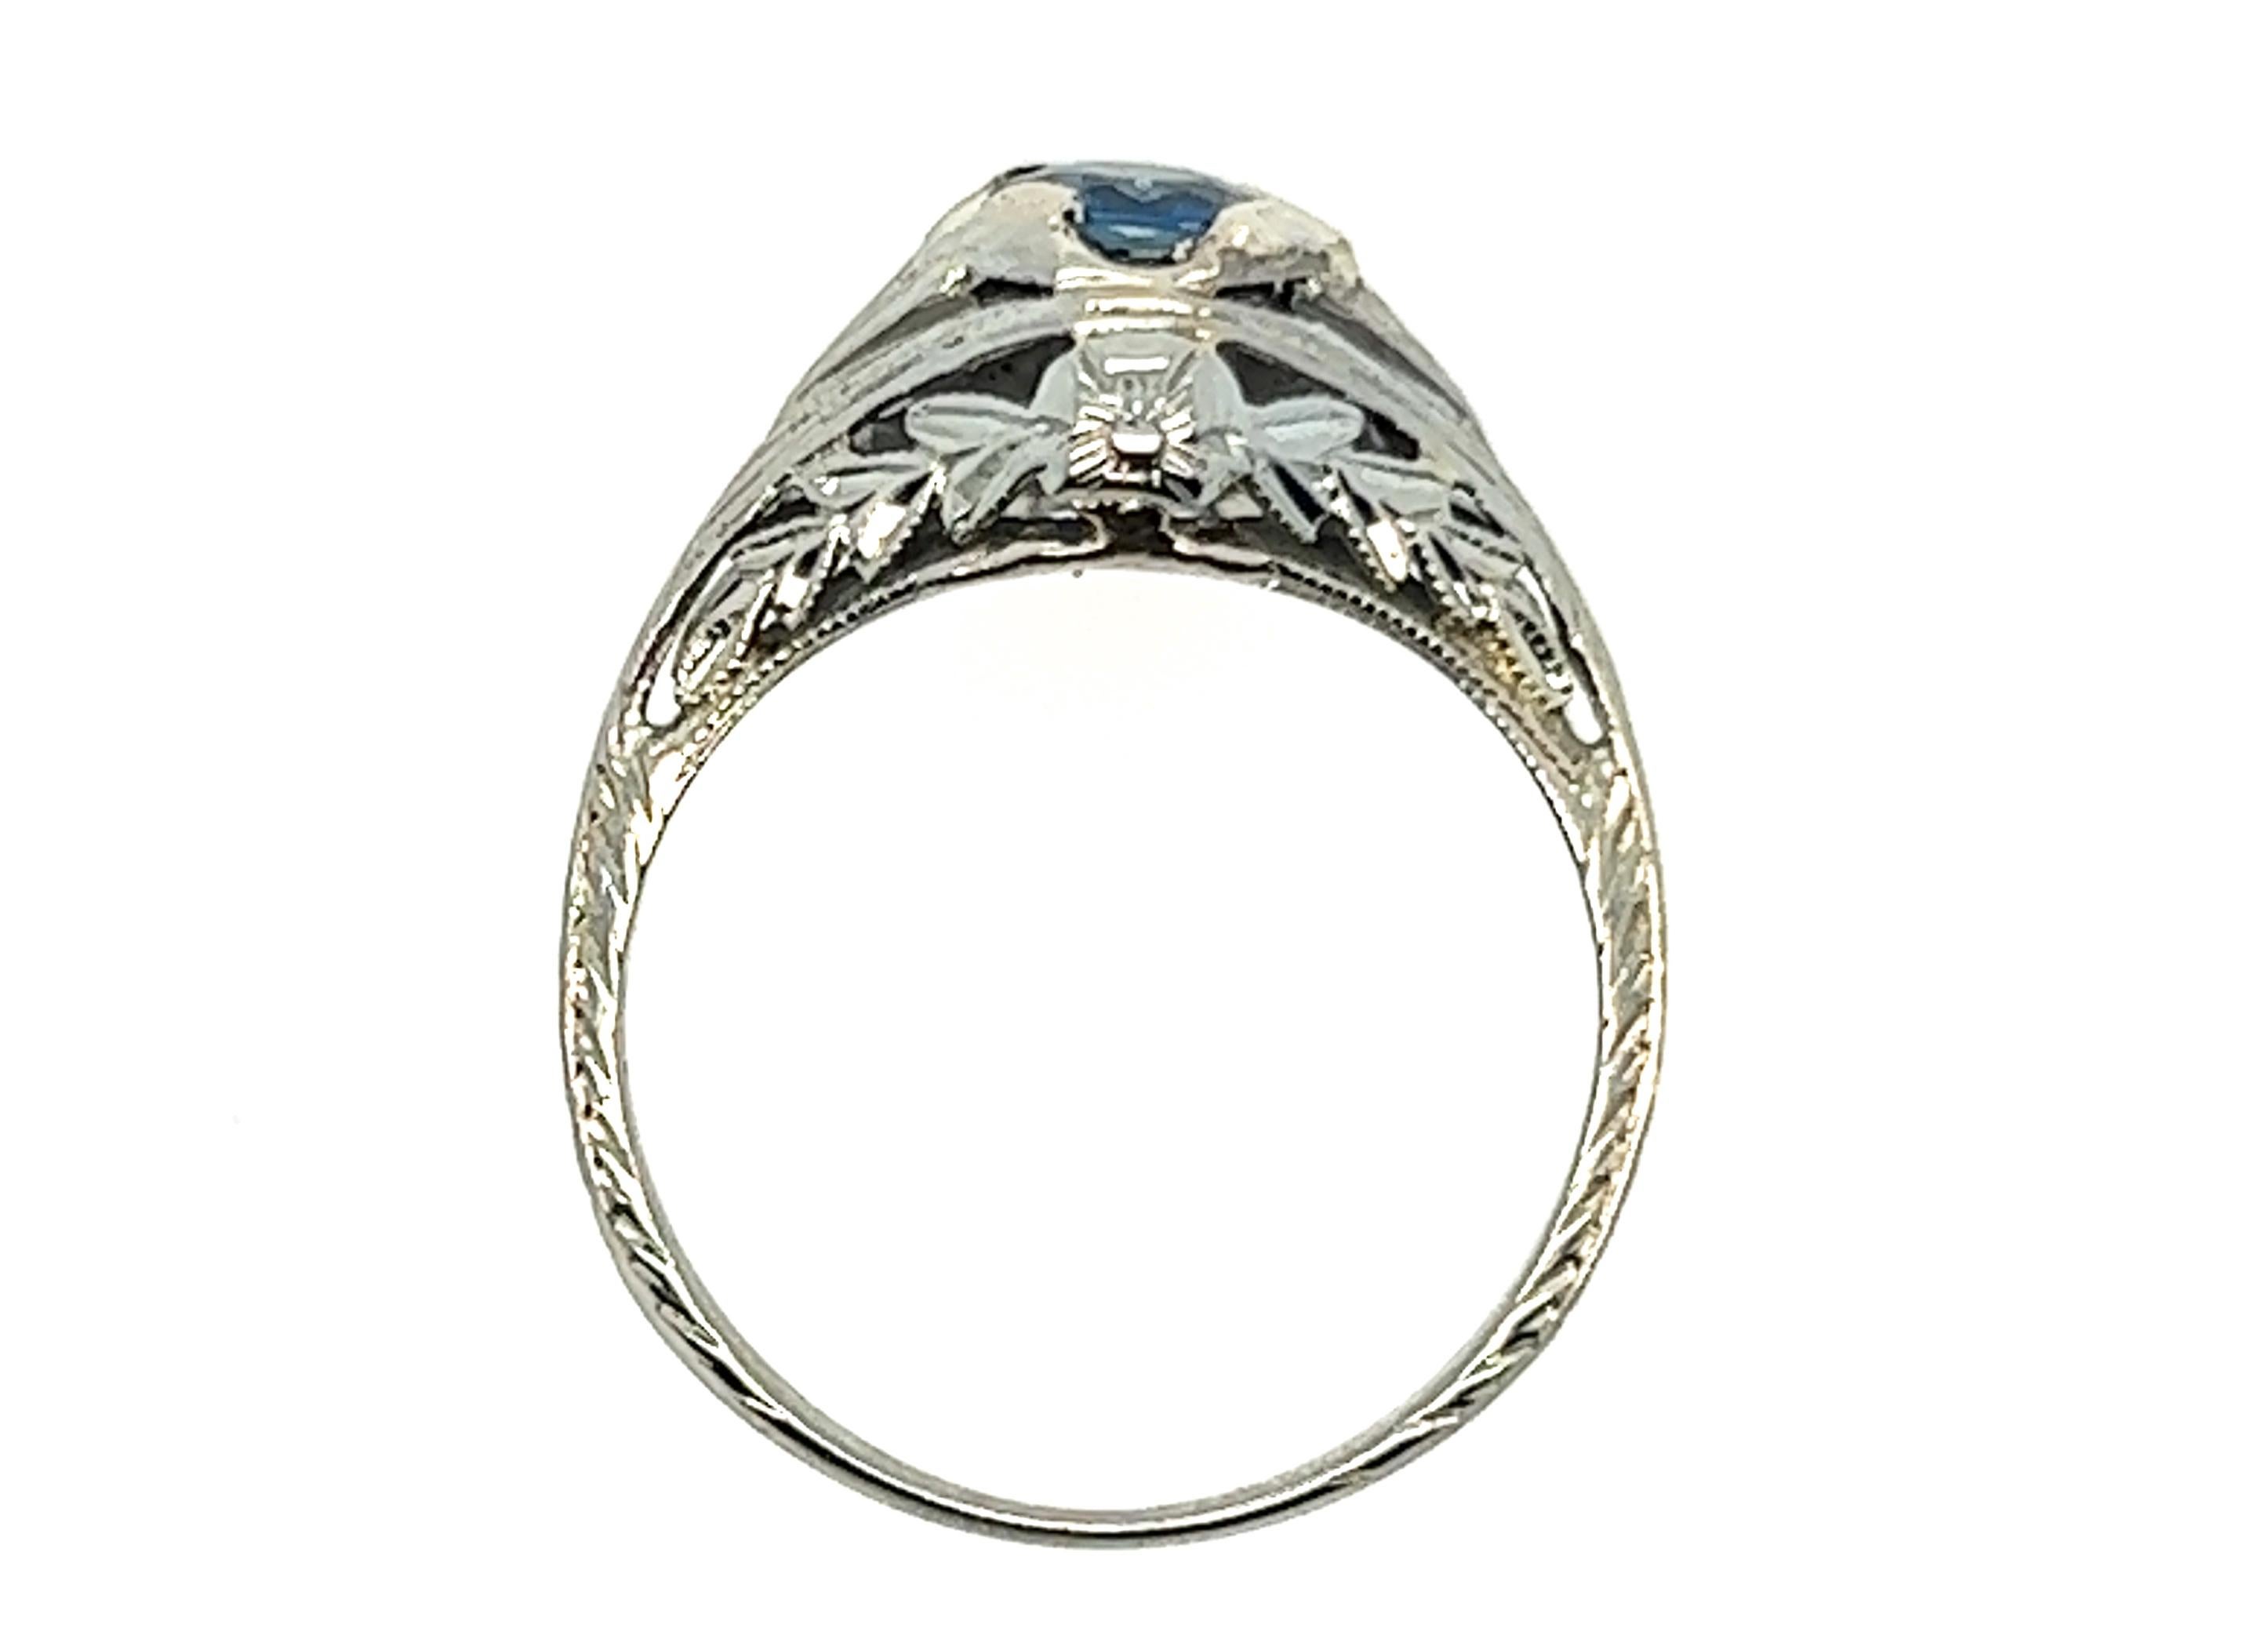 Genuine Original Art Deco Antique from the 1920's Sapphire Solitaire Engagement Ring .65ct 18K White Gold 


Featuring a Magnificent .65 Carat  Genuine Natural Round Sapphire Gemstone

Striking  Hand Engraved Flowers and Filigree 

Solid Gold